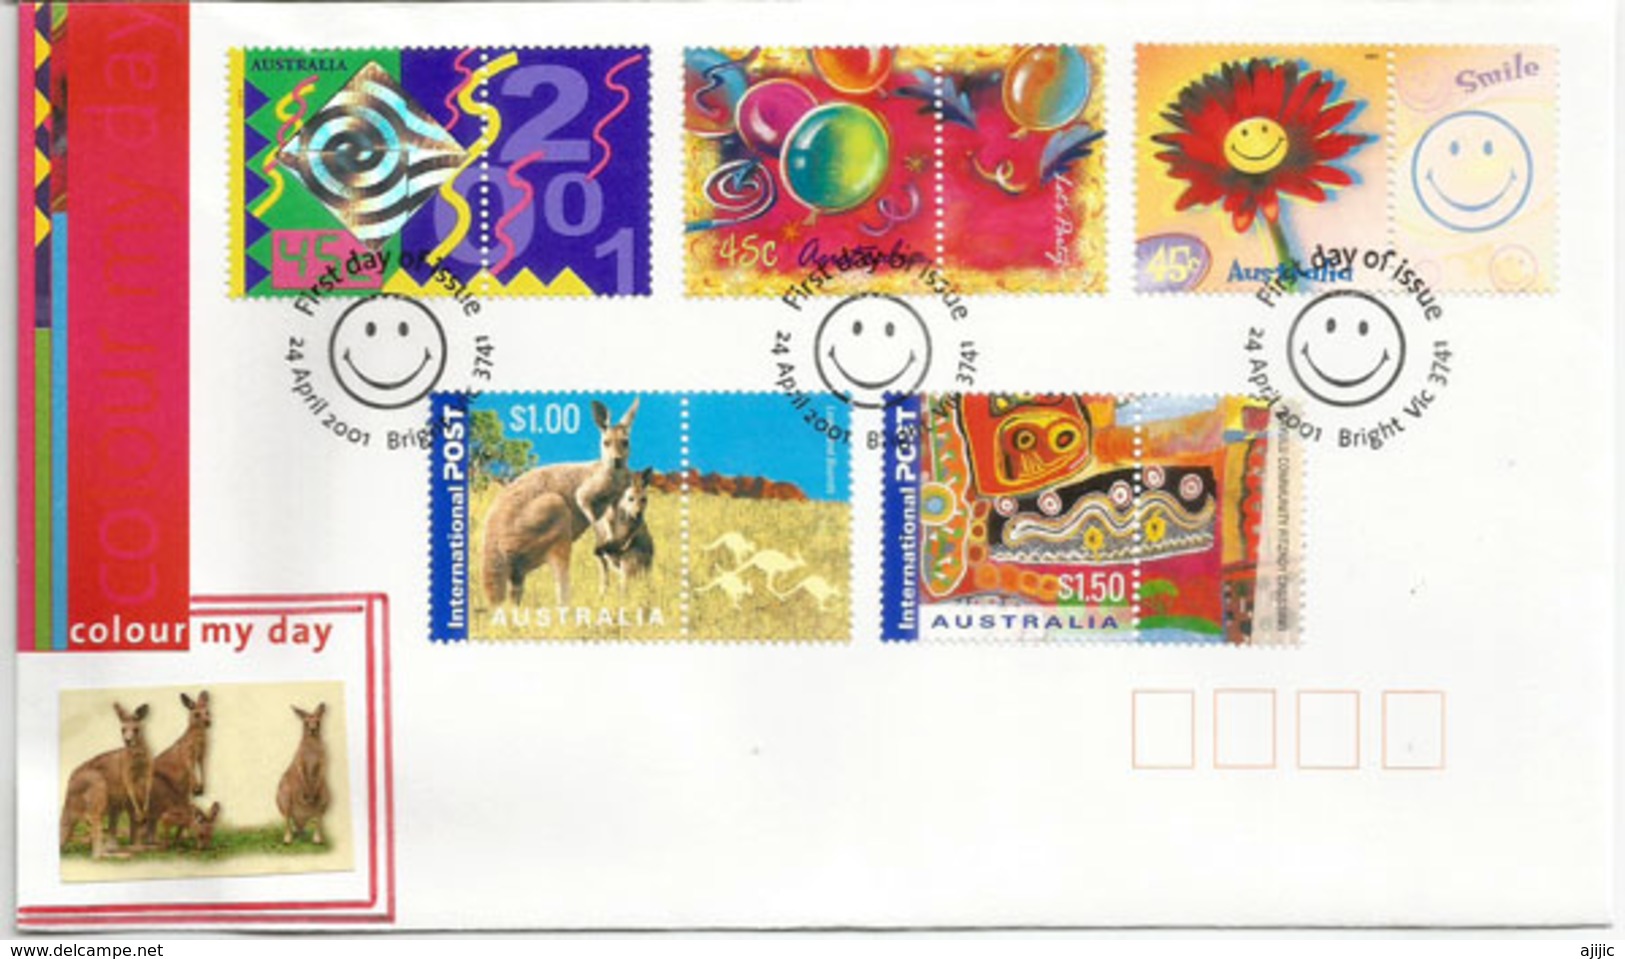 AUSTRALIA: Hologramme Stamp & Colour My Day Stamps. FDC Bright.Victoria. 2001 (hautes Faciales) - Holograms